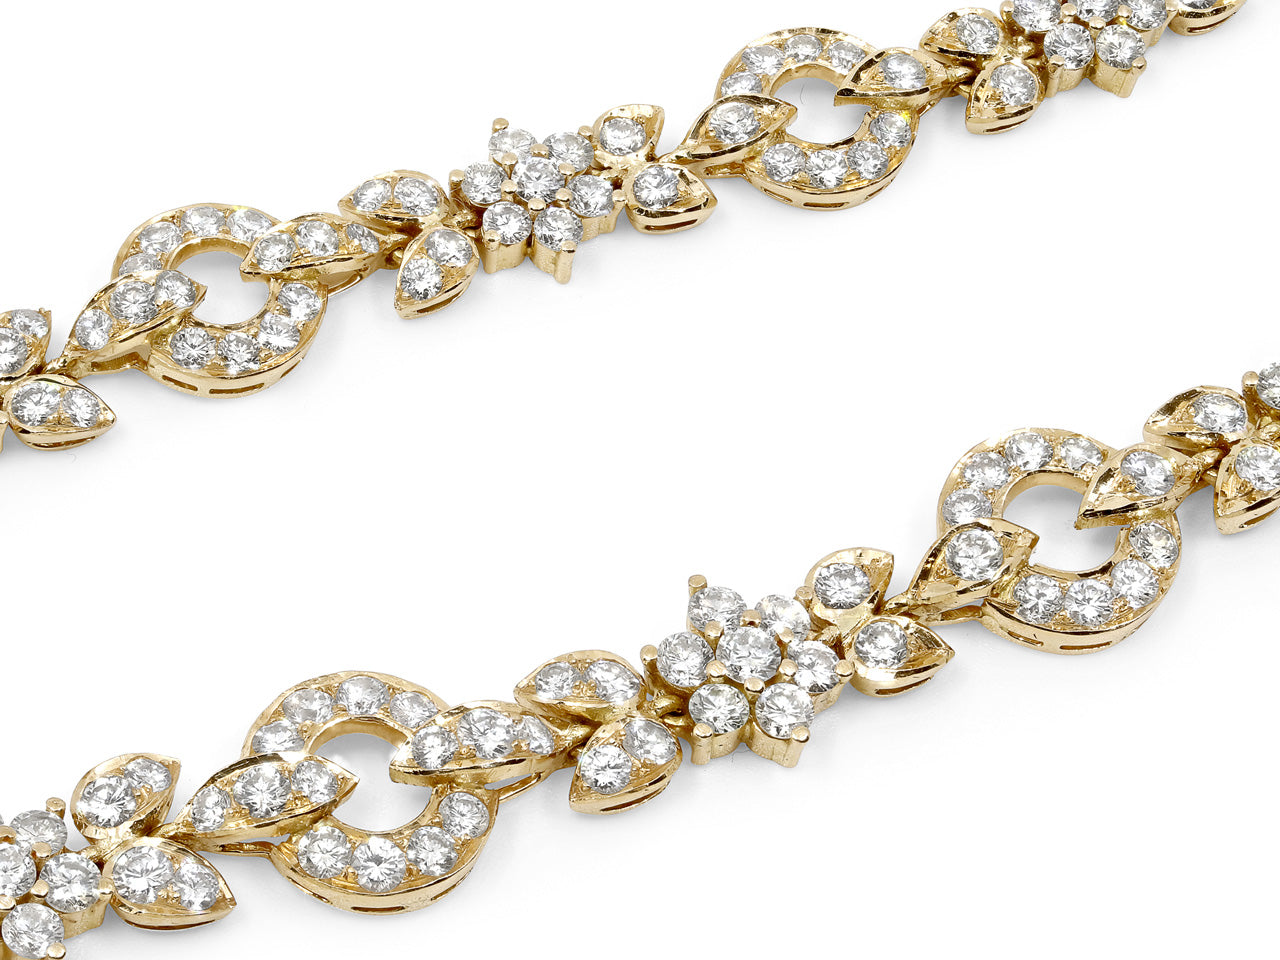 Diamond Statement Necklace in 18K Yellow Gold